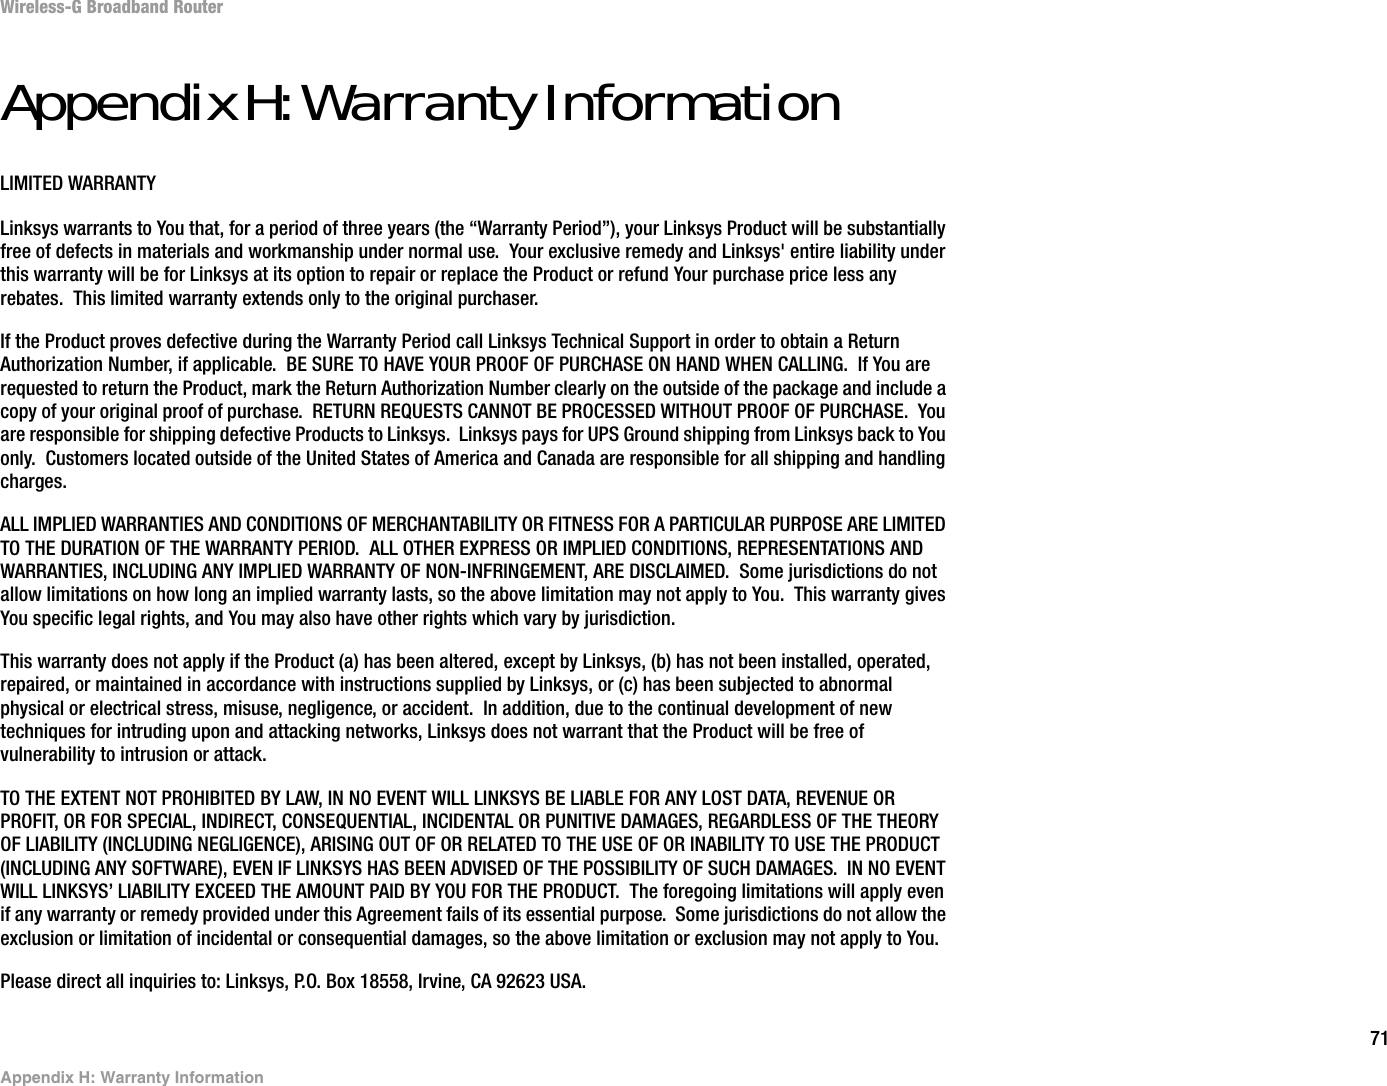 71Appendix H: Warranty InformationWireless-G Broadband RouterAppendix H: Warranty InformationLIMITED WARRANTYLinksys warrants to You that, for a period of three years (the “Warranty Period”), your Linksys Product will be substantially free of defects in materials and workmanship under normal use.  Your exclusive remedy and Linksys&apos; entire liability under this warranty will be for Linksys at its option to repair or replace the Product or refund Your purchase price less any rebates.  This limited warranty extends only to the original purchaser.  If the Product proves defective during the Warranty Period call Linksys Technical Support in order to obtain a Return Authorization Number, if applicable.  BE SURE TO HAVE YOUR PROOF OF PURCHASE ON HAND WHEN CALLING.  If You are requested to return the Product, mark the Return Authorization Number clearly on the outside of the package and include a copy of your original proof of purchase.  RETURN REQUESTS CANNOT BE PROCESSED WITHOUT PROOF OF PURCHASE.  You are responsible for shipping defective Products to Linksys.  Linksys pays for UPS Ground shipping from Linksys back to You only.  Customers located outside of the United States of America and Canada are responsible for all shipping and handling charges. ALL IMPLIED WARRANTIES AND CONDITIONS OF MERCHANTABILITY OR FITNESS FOR A PARTICULAR PURPOSE ARE LIMITED TO THE DURATION OF THE WARRANTY PERIOD.  ALL OTHER EXPRESS OR IMPLIED CONDITIONS, REPRESENTATIONS AND WARRANTIES, INCLUDING ANY IMPLIED WARRANTY OF NON-INFRINGEMENT, ARE DISCLAIMED.  Some jurisdictions do not allow limitations on how long an implied warranty lasts, so the above limitation may not apply to You.  This warranty gives You specific legal rights, and You may also have other rights which vary by jurisdiction.This warranty does not apply if the Product (a) has been altered, except by Linksys, (b) has not been installed, operated, repaired, or maintained in accordance with instructions supplied by Linksys, or (c) has been subjected to abnormal physical or electrical stress, misuse, negligence, or accident.  In addition, due to the continual development of new techniques for intruding upon and attacking networks, Linksys does not warrant that the Product will be free of vulnerability to intrusion or attack.TO THE EXTENT NOT PROHIBITED BY LAW, IN NO EVENT WILL LINKSYS BE LIABLE FOR ANY LOST DATA, REVENUE OR PROFIT, OR FOR SPECIAL, INDIRECT, CONSEQUENTIAL, INCIDENTAL OR PUNITIVE DAMAGES, REGARDLESS OF THE THEORY OF LIABILITY (INCLUDING NEGLIGENCE), ARISING OUT OF OR RELATED TO THE USE OF OR INABILITY TO USE THE PRODUCT (INCLUDING ANY SOFTWARE), EVEN IF LINKSYS HAS BEEN ADVISED OF THE POSSIBILITY OF SUCH DAMAGES.  IN NO EVENT WILL LINKSYS’ LIABILITY EXCEED THE AMOUNT PAID BY YOU FOR THE PRODUCT.  The foregoing limitations will apply even if any warranty or remedy provided under this Agreement fails of its essential purpose.  Some jurisdictions do not allow the exclusion or limitation of incidental or consequential damages, so the above limitation or exclusion may not apply to You.Please direct all inquiries to: Linksys, P.O. Box 18558, Irvine, CA 92623 USA.